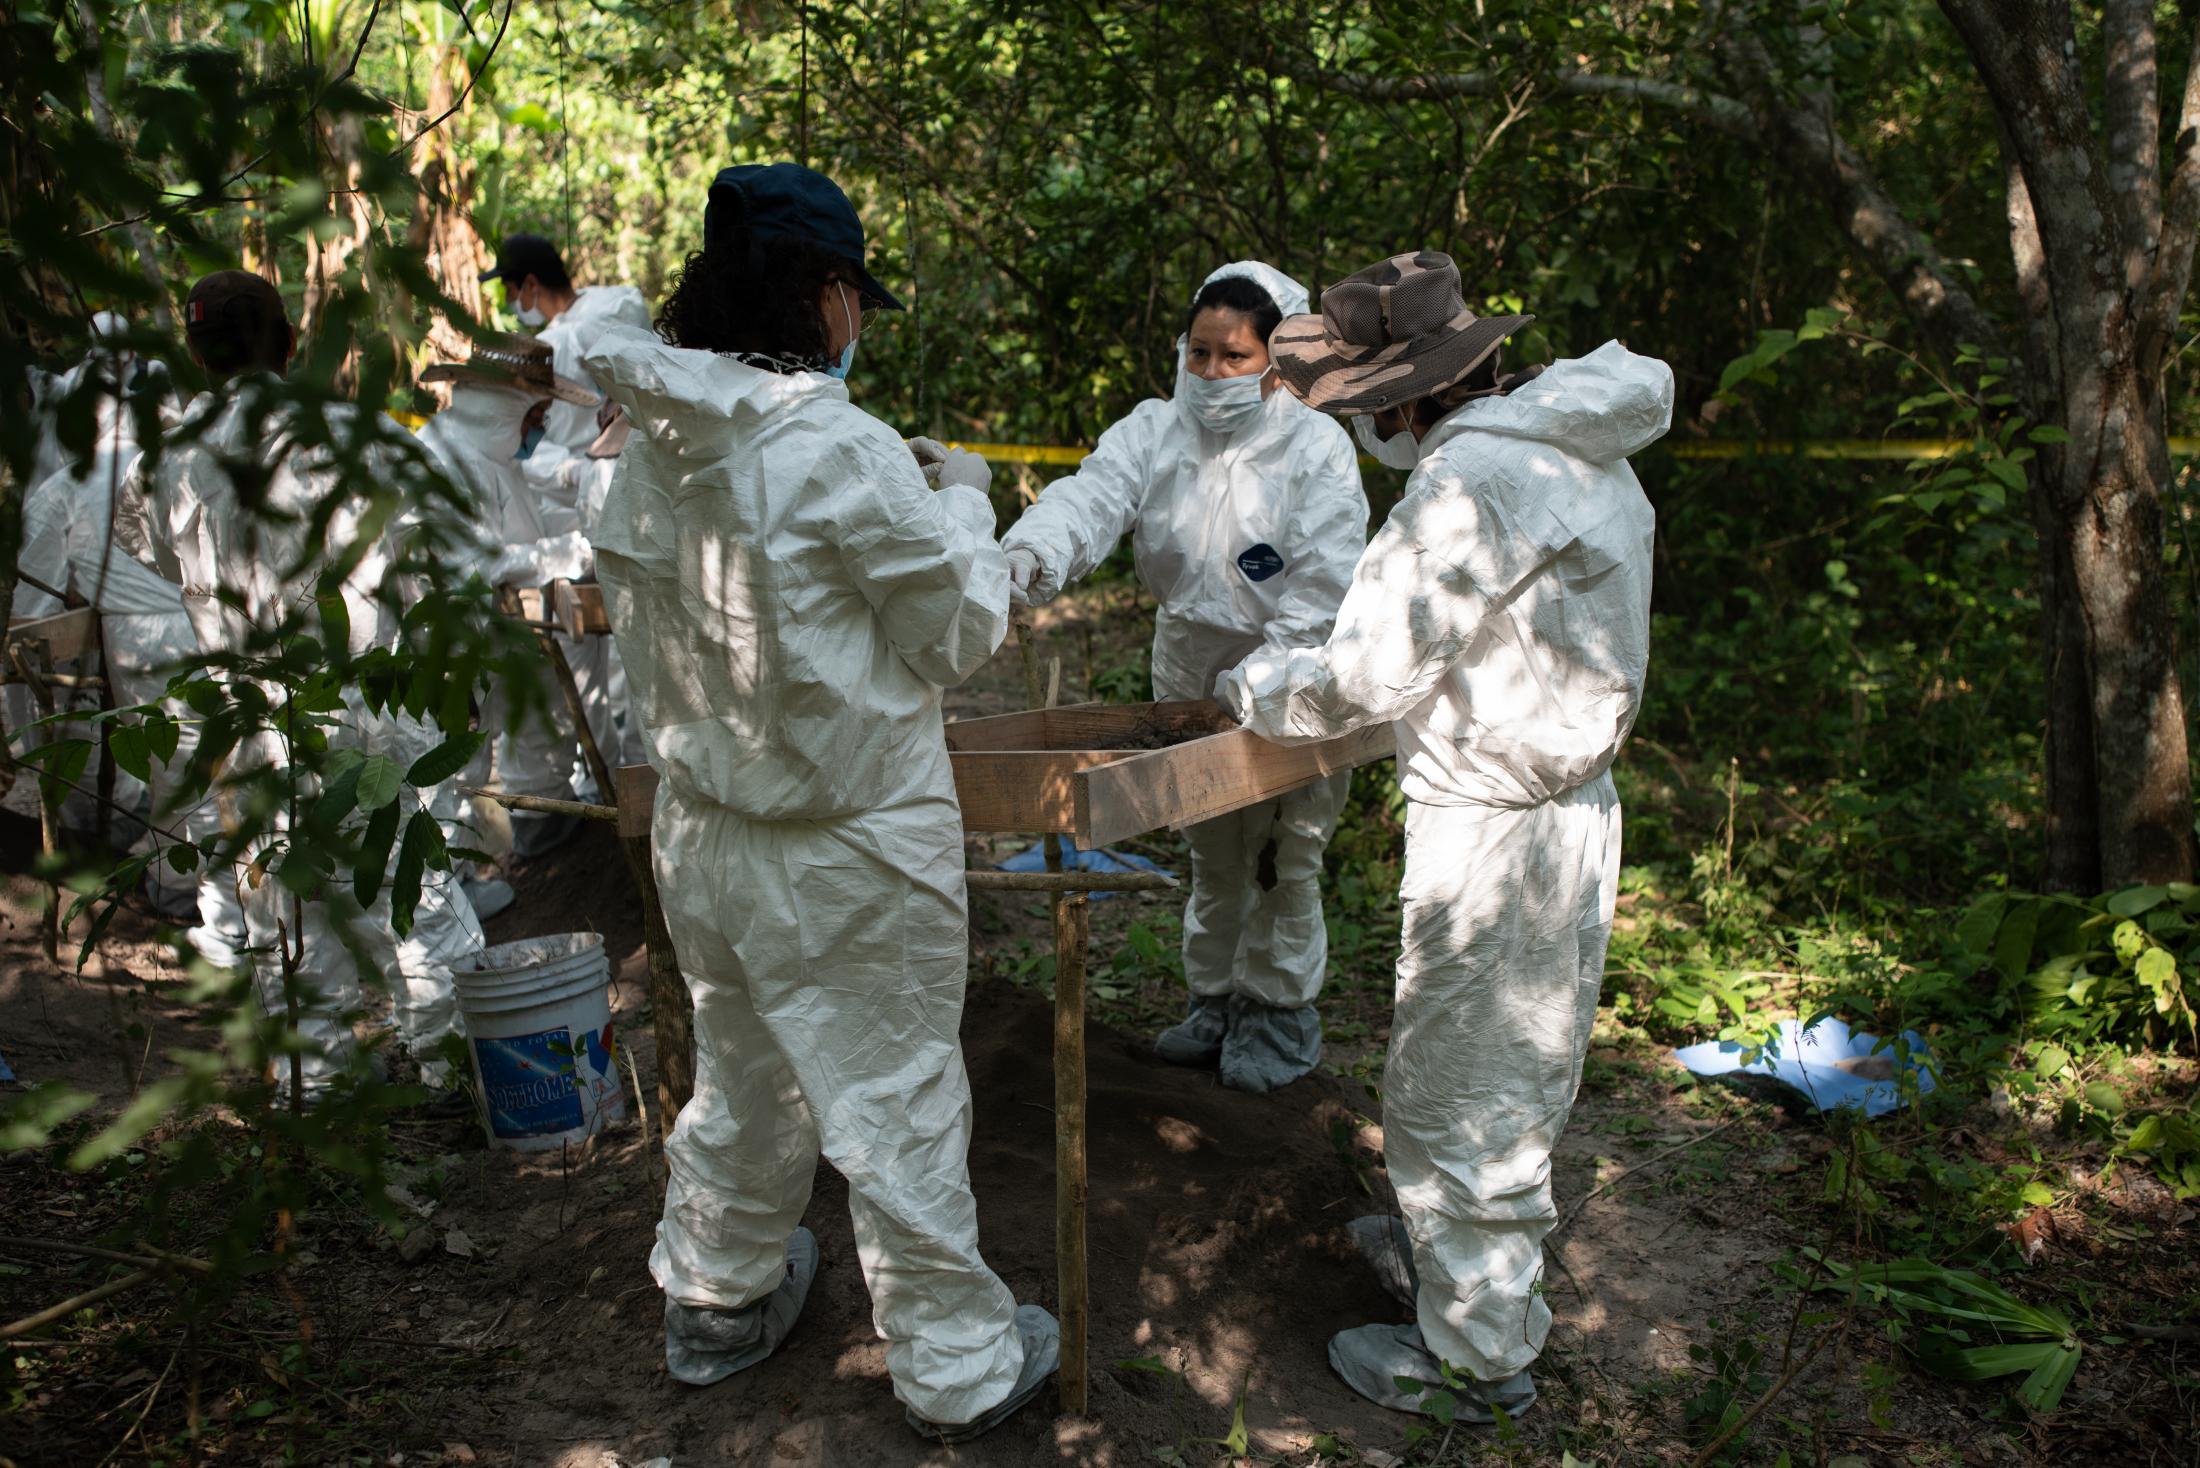 A group of relatives of missing persons and forensic experts work inside the ranch &quot;La Gallera&quot; where human remains have been located during the fifth National Missing Persons Search Brigade in Tihuatl&aacute;n, Veracruz, Mexico, on February 20, 2020. Victoria Razo for NPR